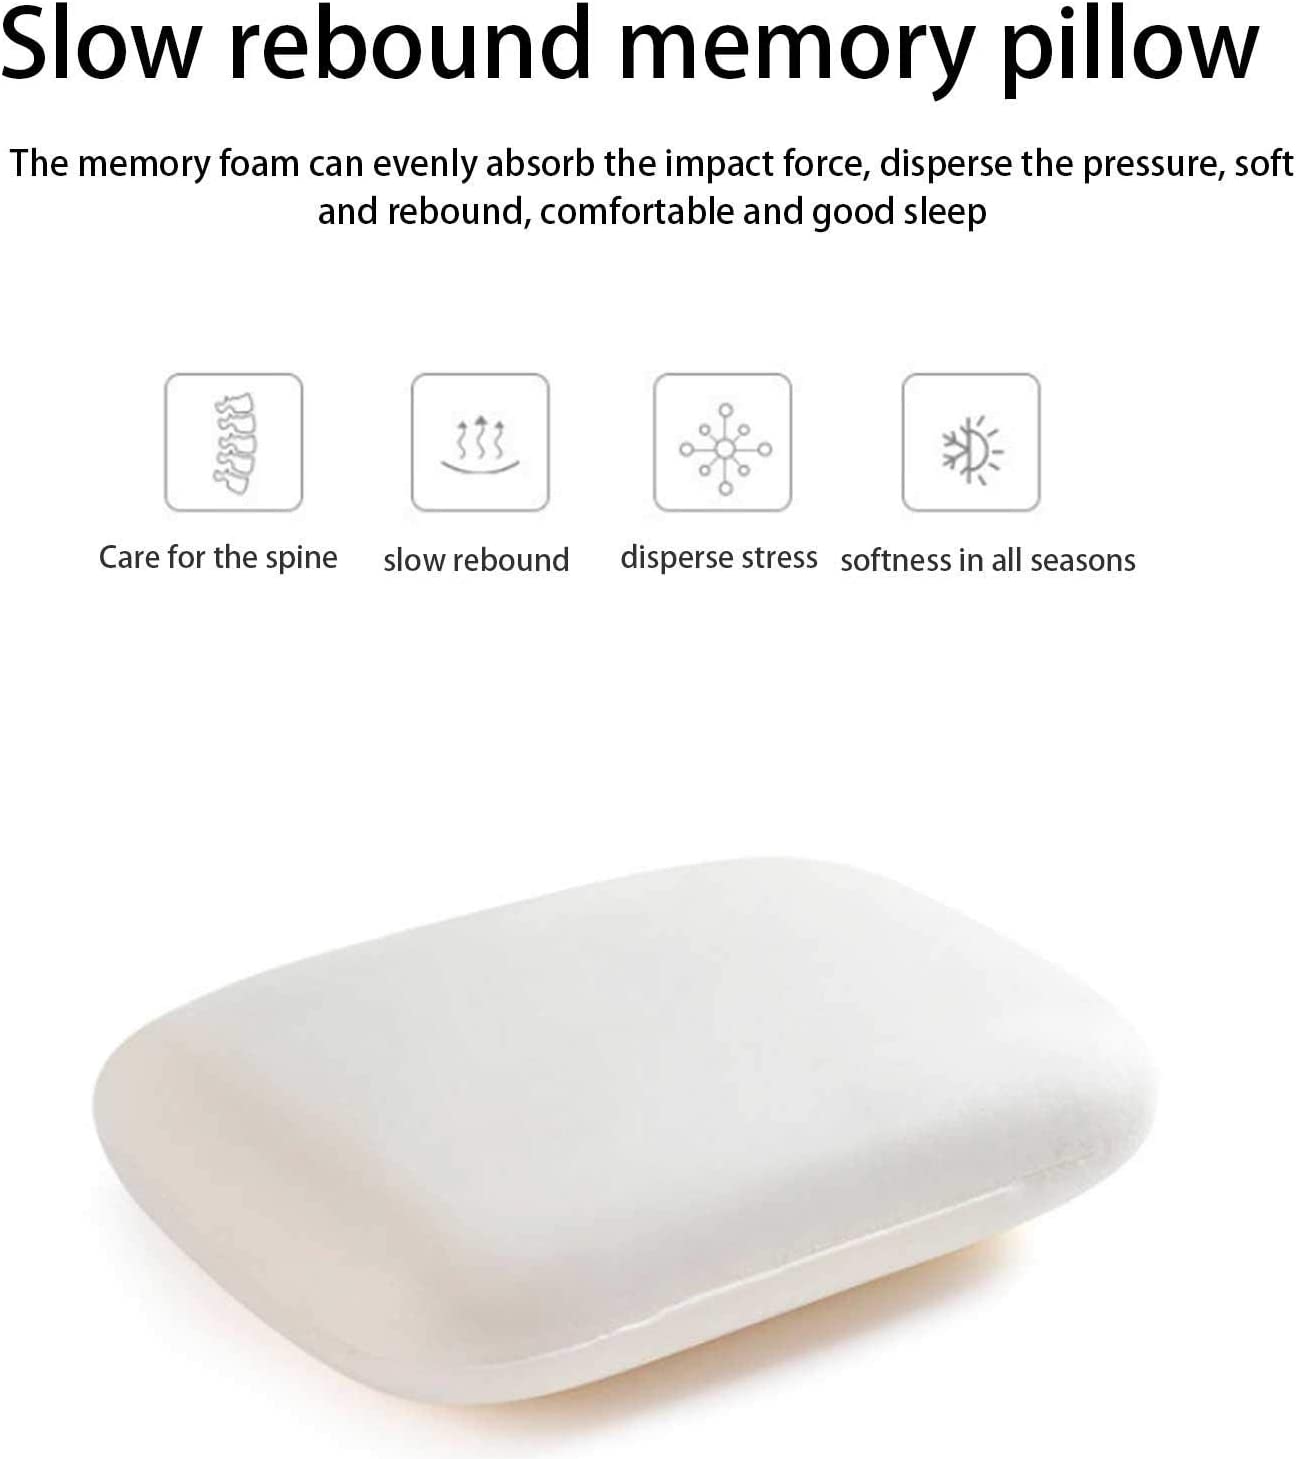 Todaytop Rectangle Memory Foam Travel Pillow, Soft Slow Rebound Head and Neck Cushion with Plush Removable Cover, Perfect for Airplane Carry-on Lumbar Pillow,39x28x9cm